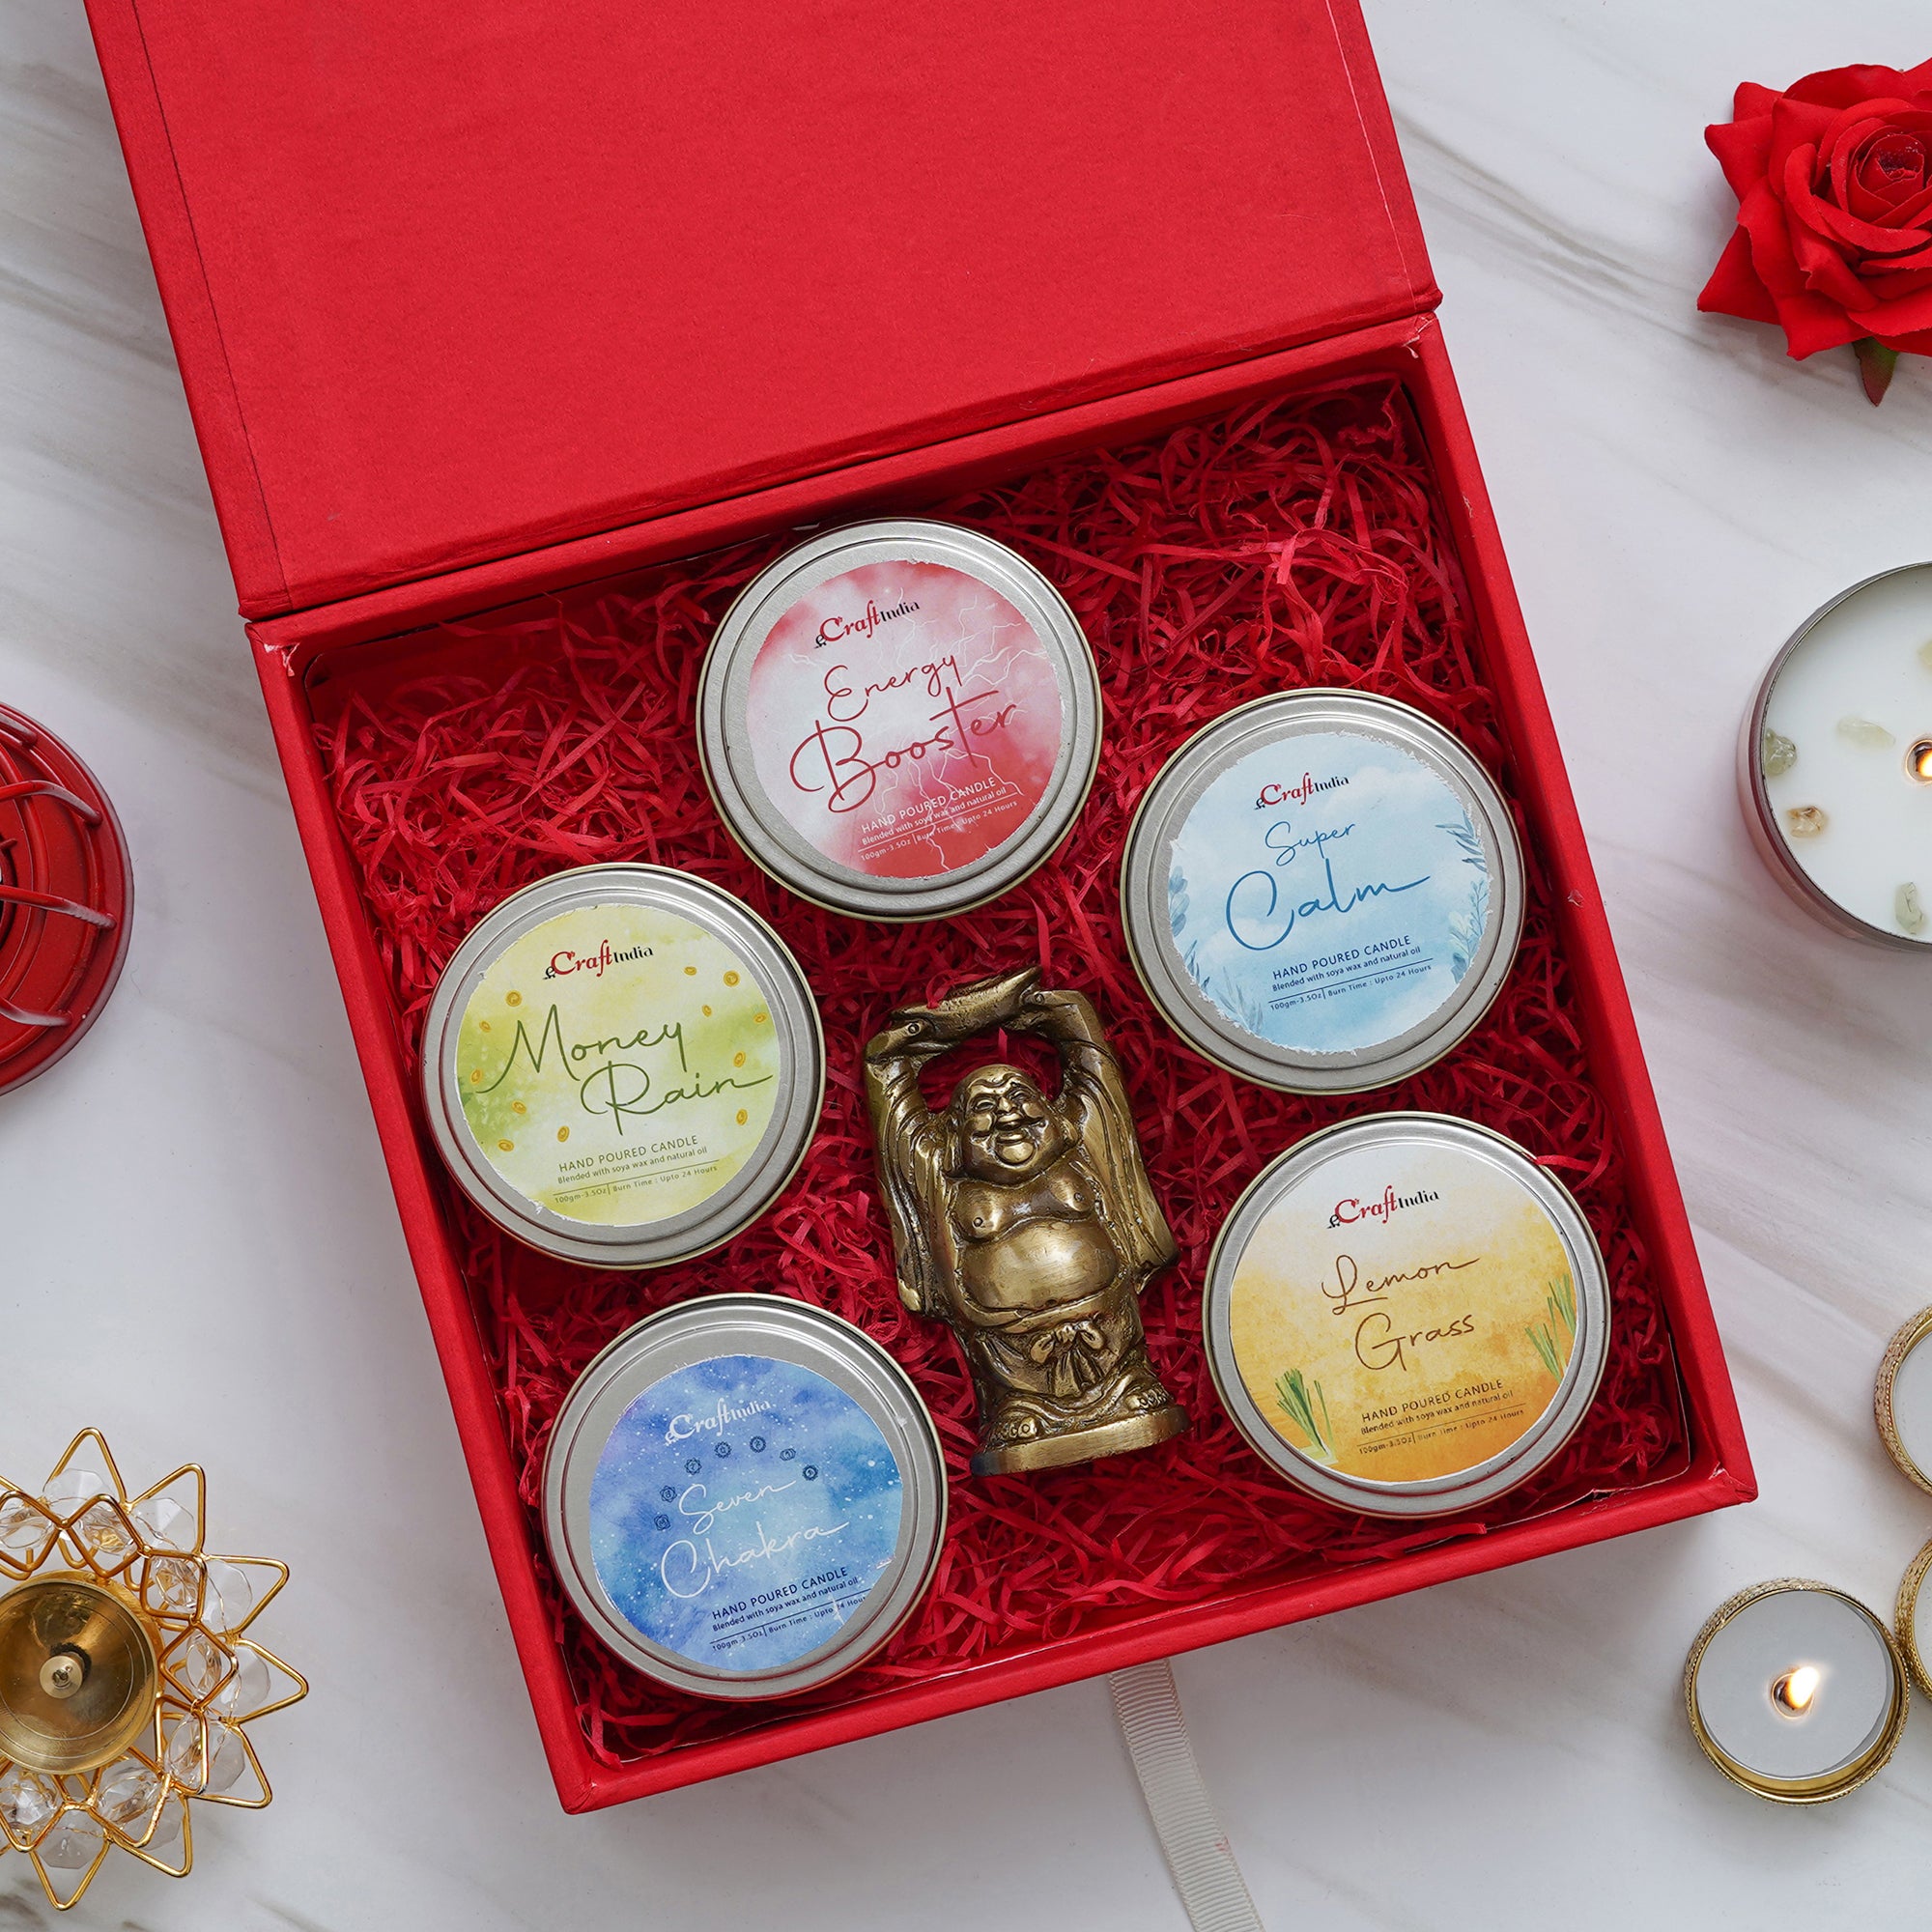 eCraftIndia Scented Candles Gift Box - Standing Laughing Buddha Statue holding a gold ingot with his hands upright, Set of 5 Seven Chakra, Money Rain, Energy Booster, Super Calm, Lemon Grass Hand Poured Soya Wax Candles